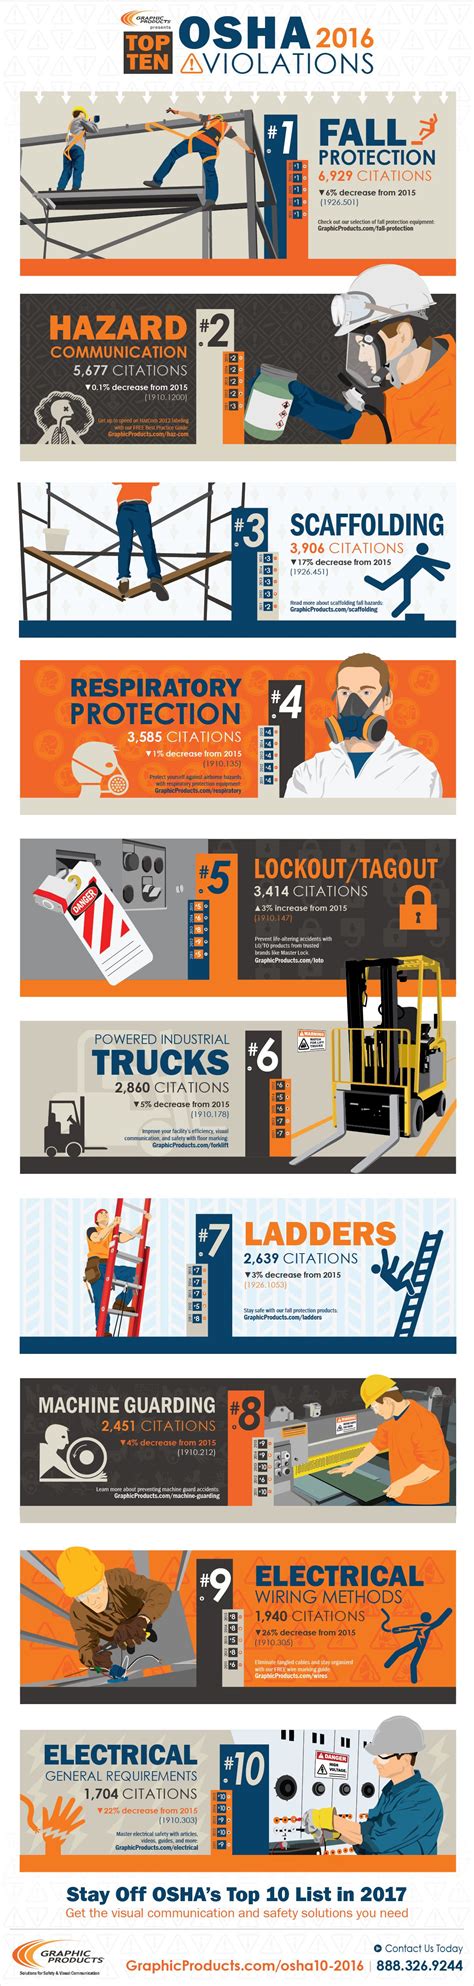 Infographic The Top 10 Osha Safety Violations Of 2016 Workplace